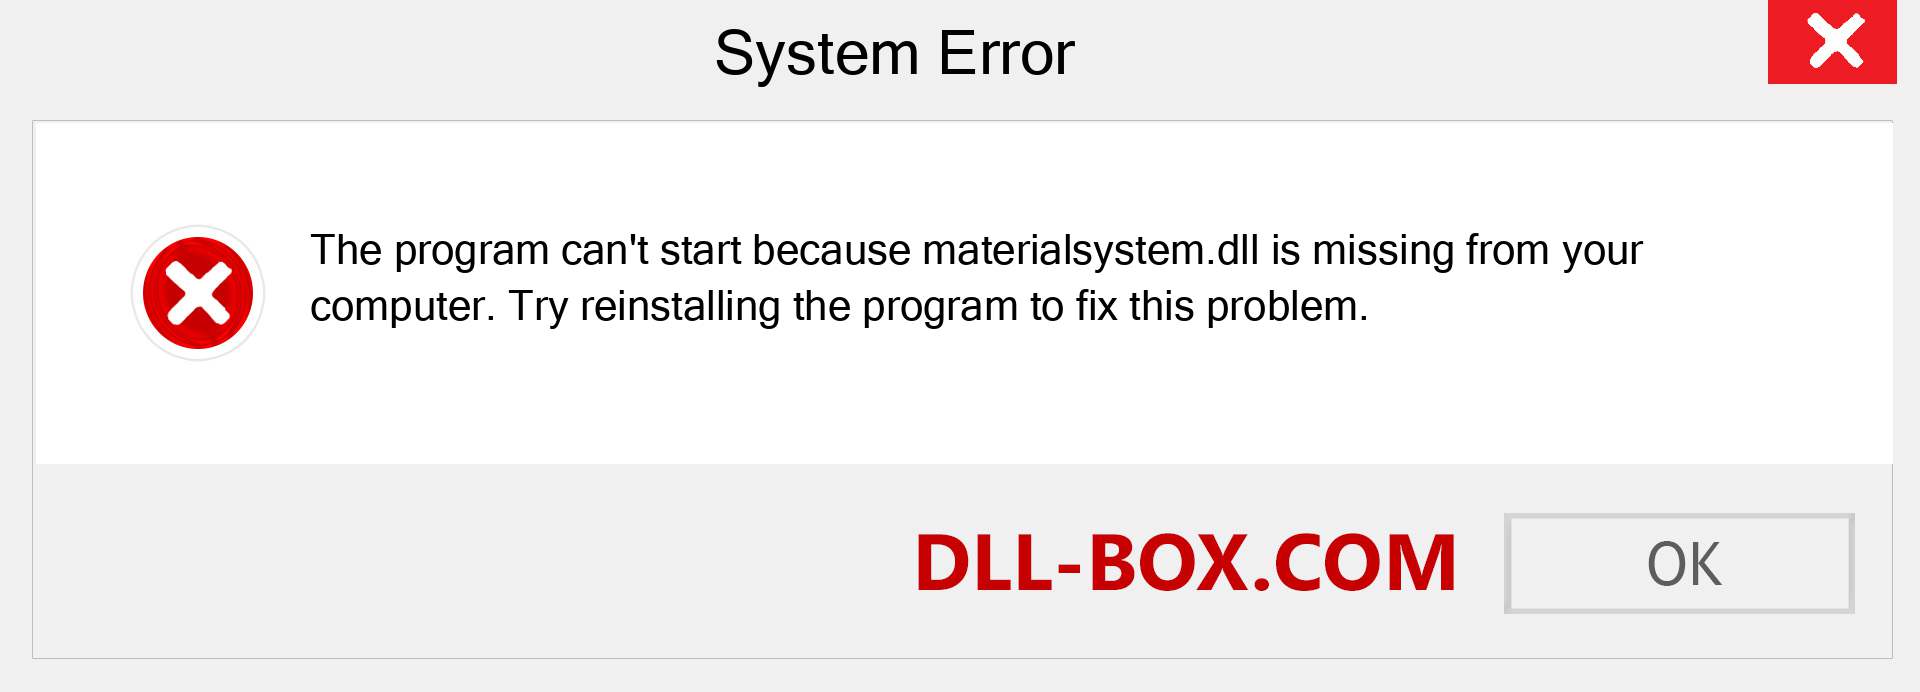  materialsystem.dll file is missing?. Download for Windows 7, 8, 10 - Fix  materialsystem dll Missing Error on Windows, photos, images